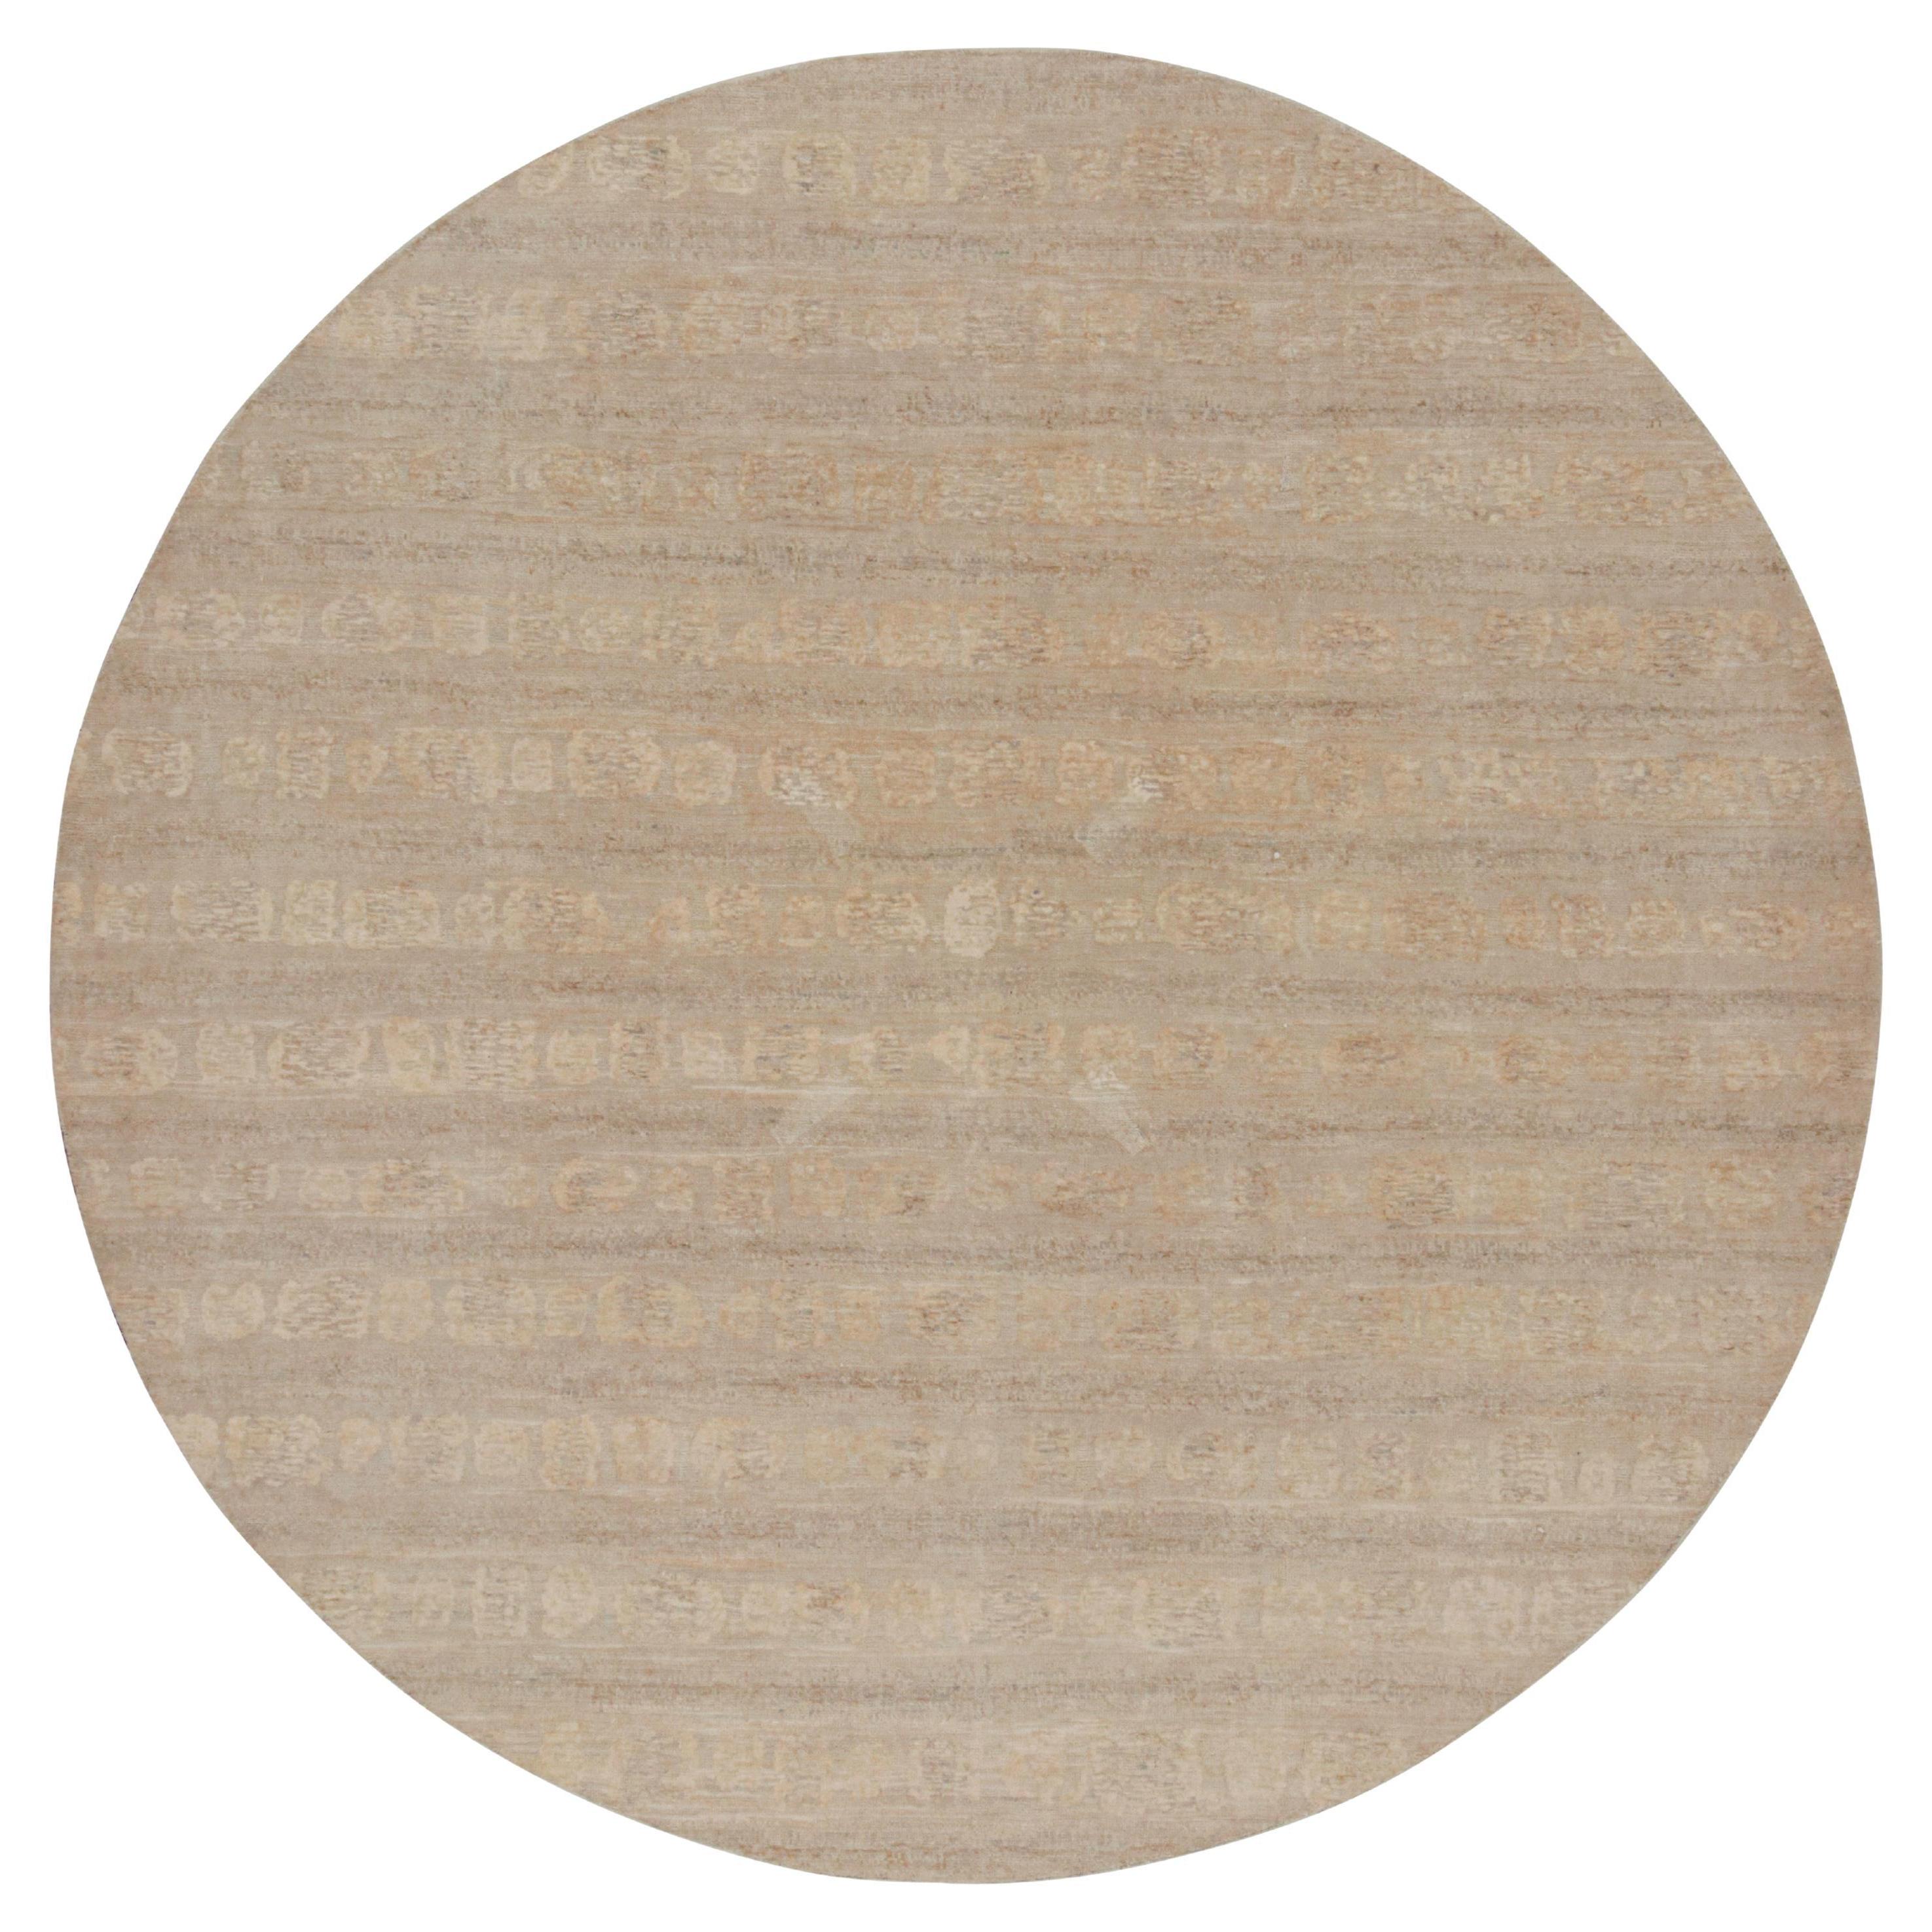 Rug & Kilim's Contemporary Abstract Textural Circle Rug in Beige (tapis circulaire abstrait contemporain en beige)